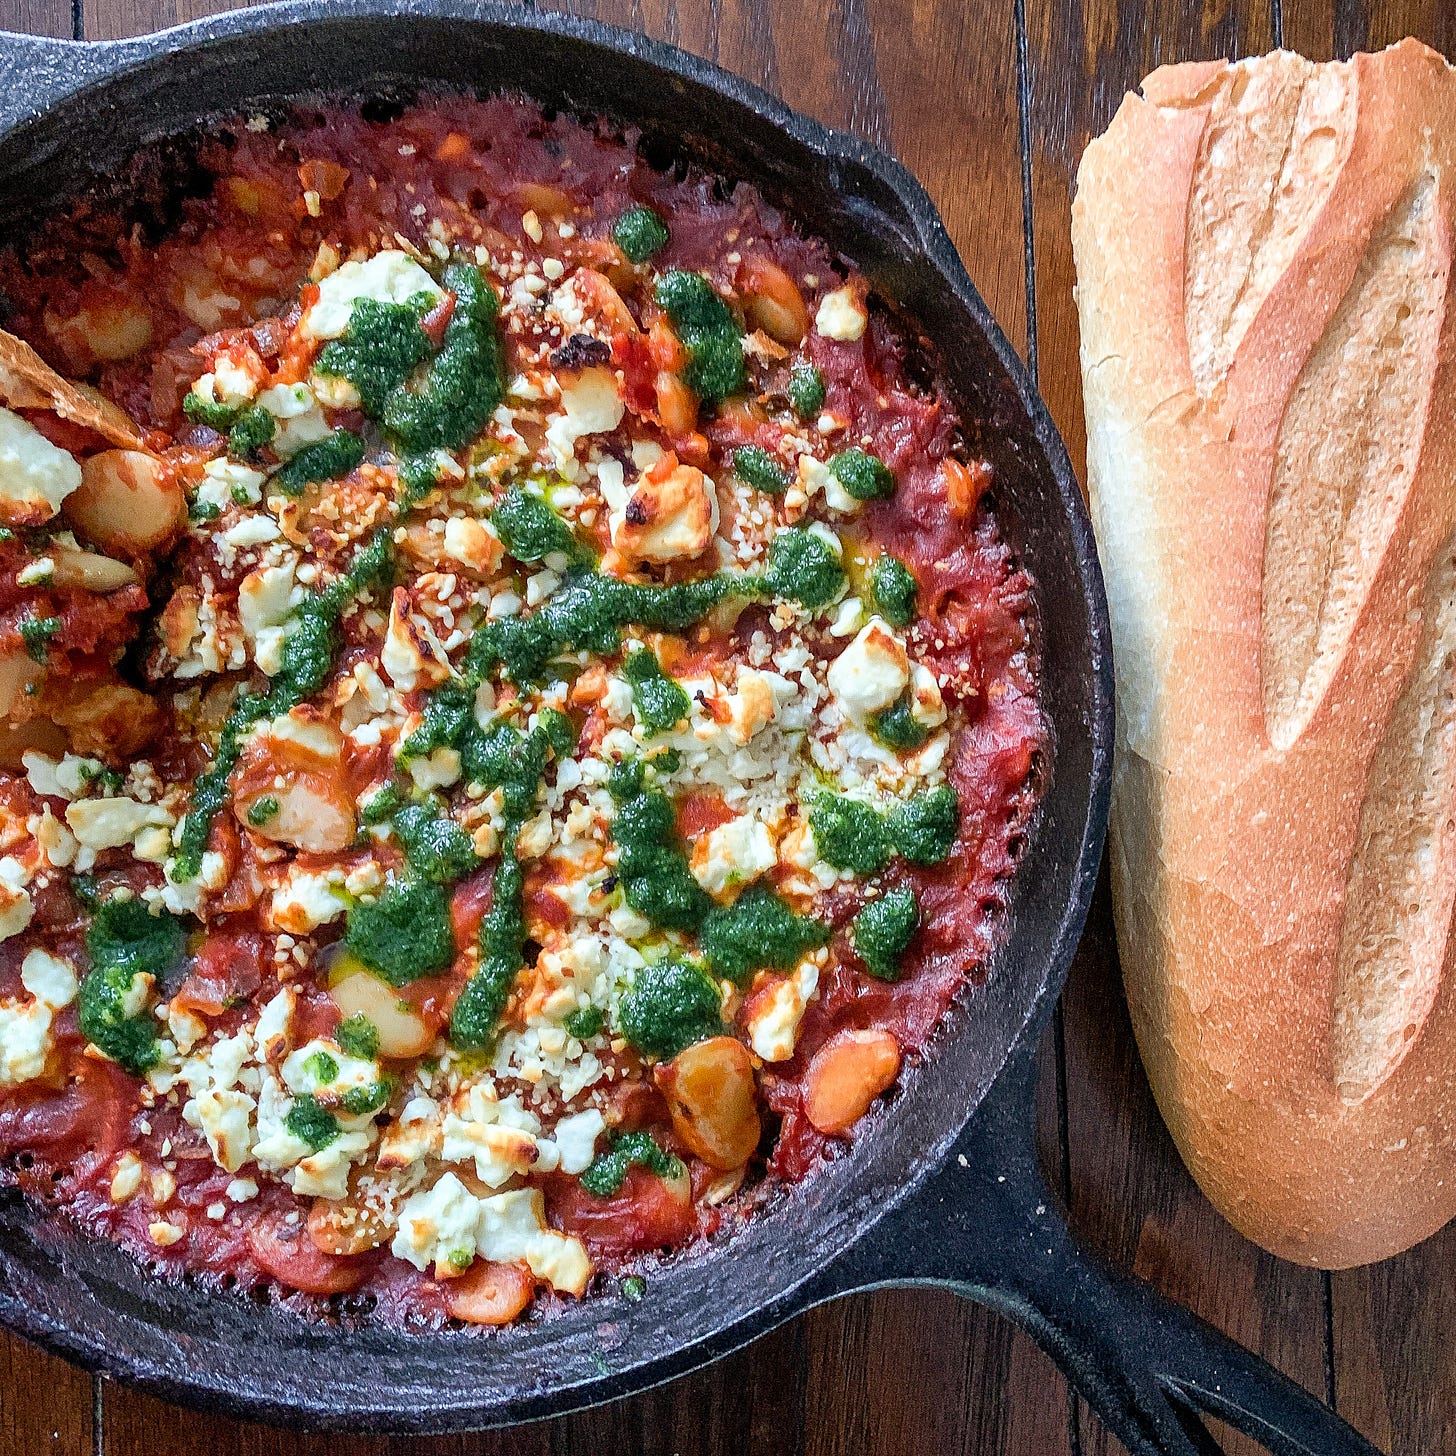 Cast iron pan on the left side is filled with a deep red and caramelized tomato sauce, spotted with white lima beans, topped with browned crumbles of feta, and drizzled with a bright green herb sauce. Half a rustic baguette is served to the right of the pan.